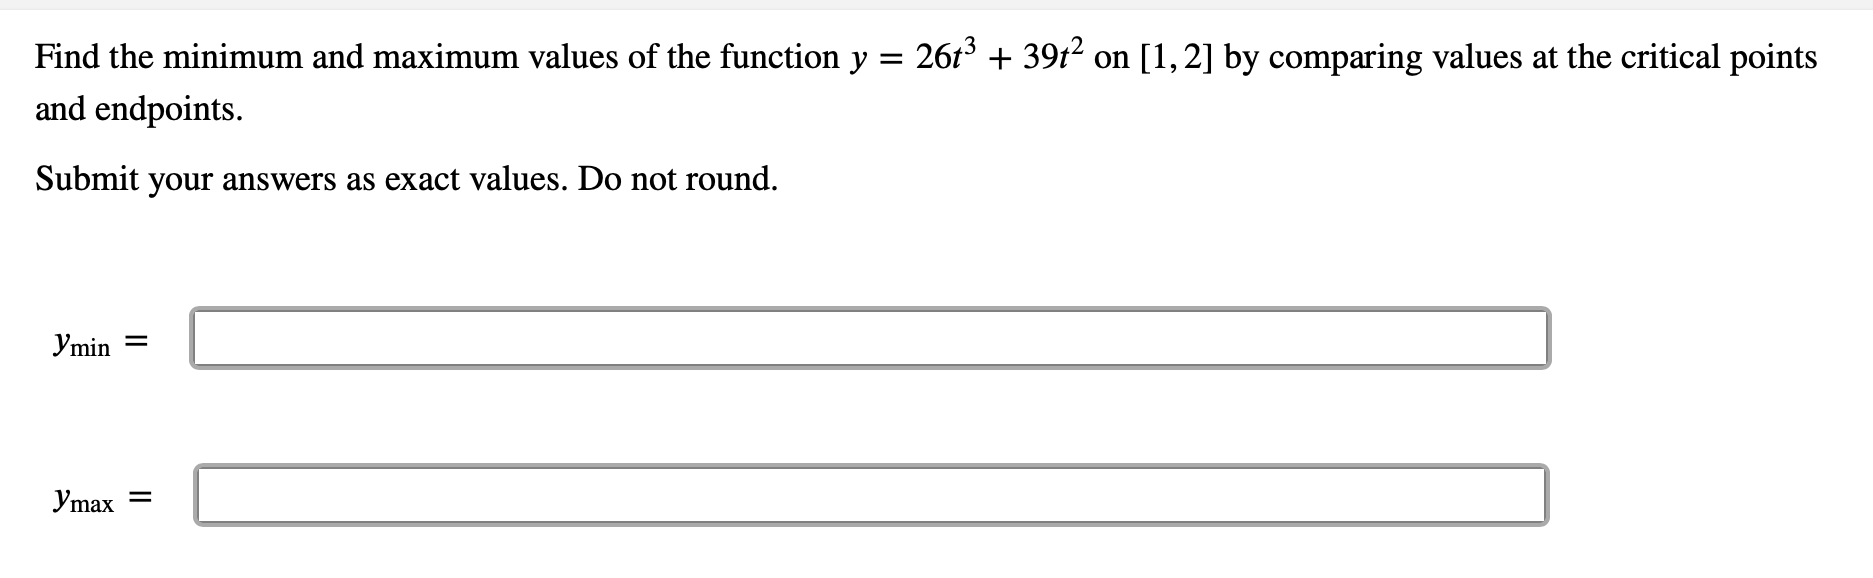 Find the minimum and maximum values of the function y = 2613 + 39t2 on [1,2] by comparing values at the critical points
and endpoints.
Submit your answers as exact values. Do not round.
Ymin =
Ymax =
